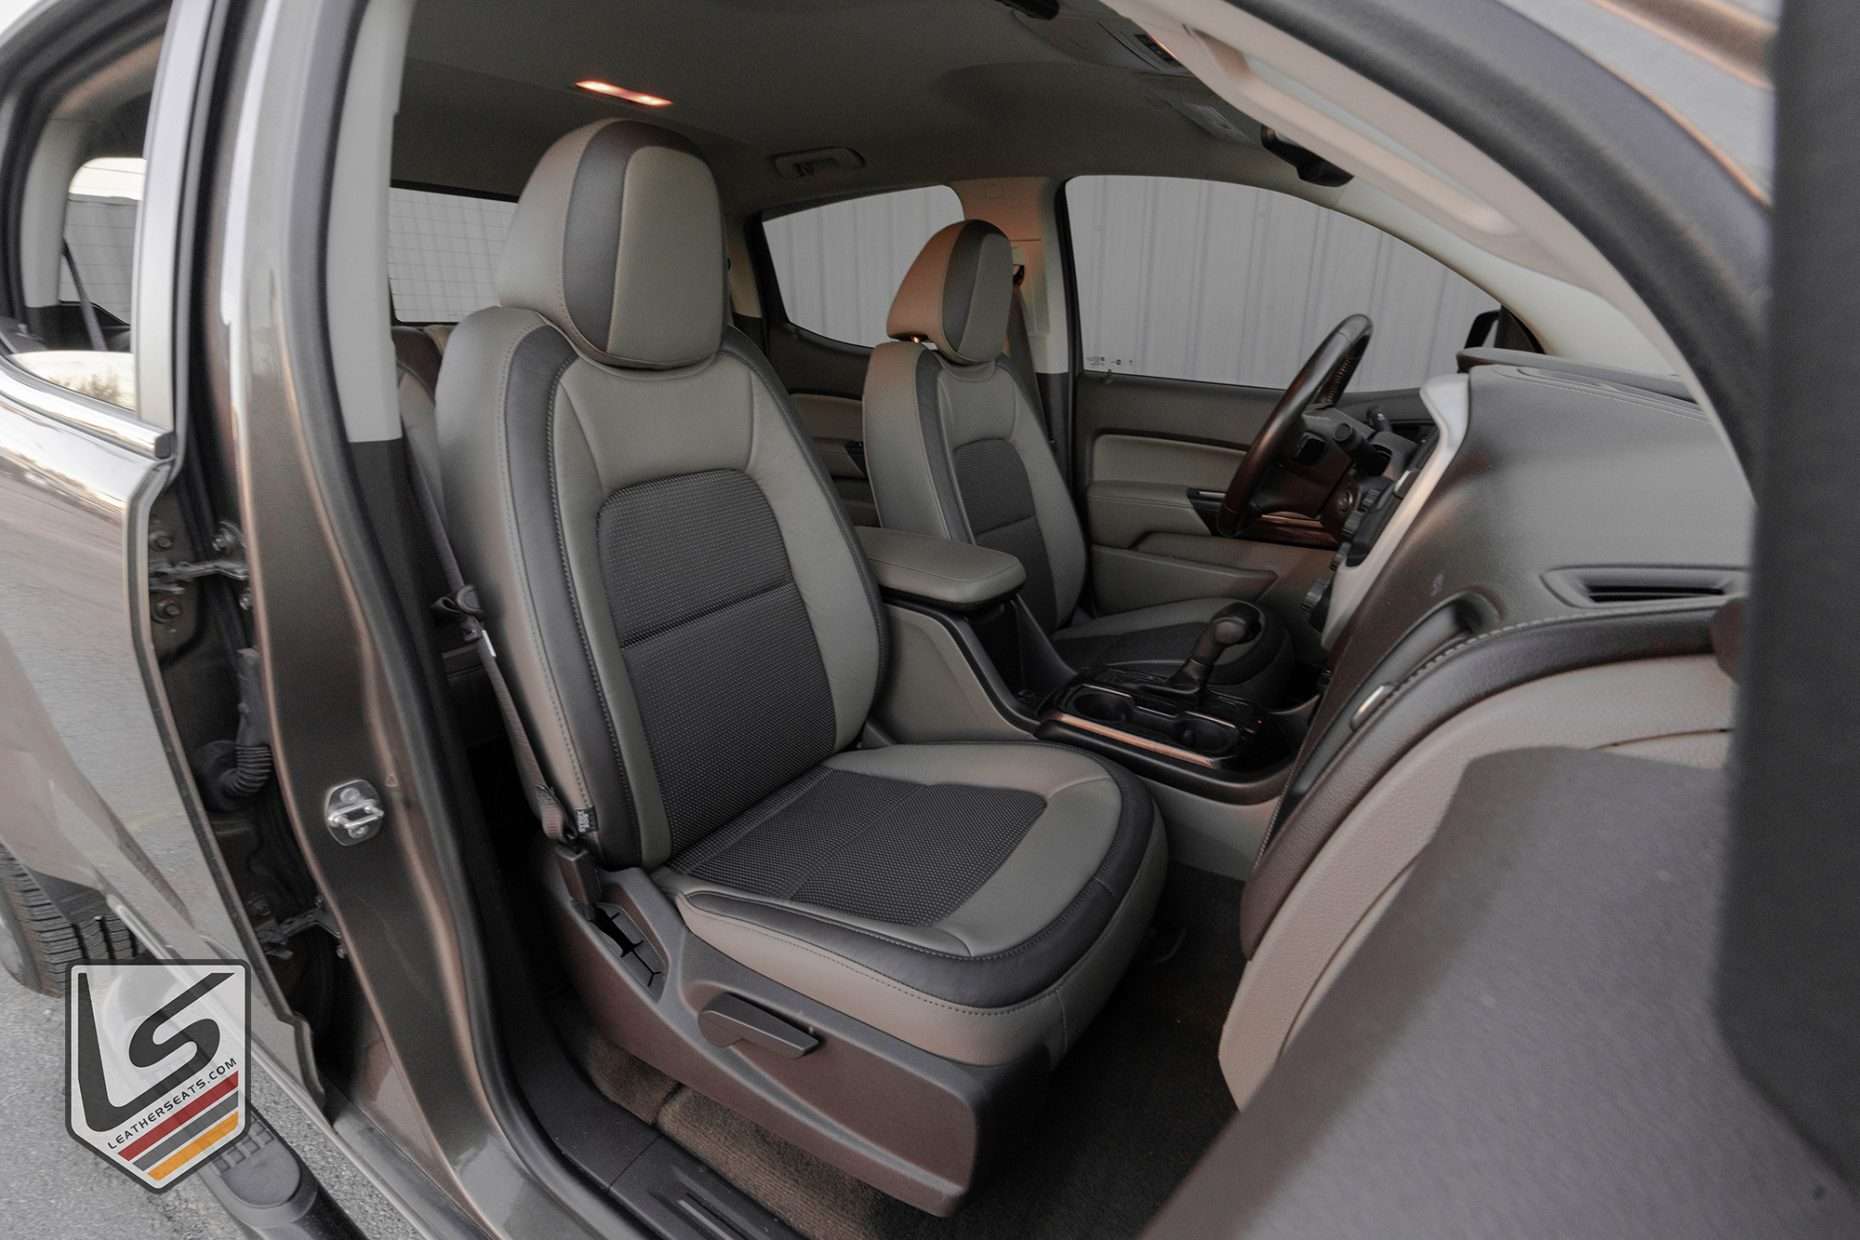 GMC Canyon with leather interior - Alternative view of passenger seat